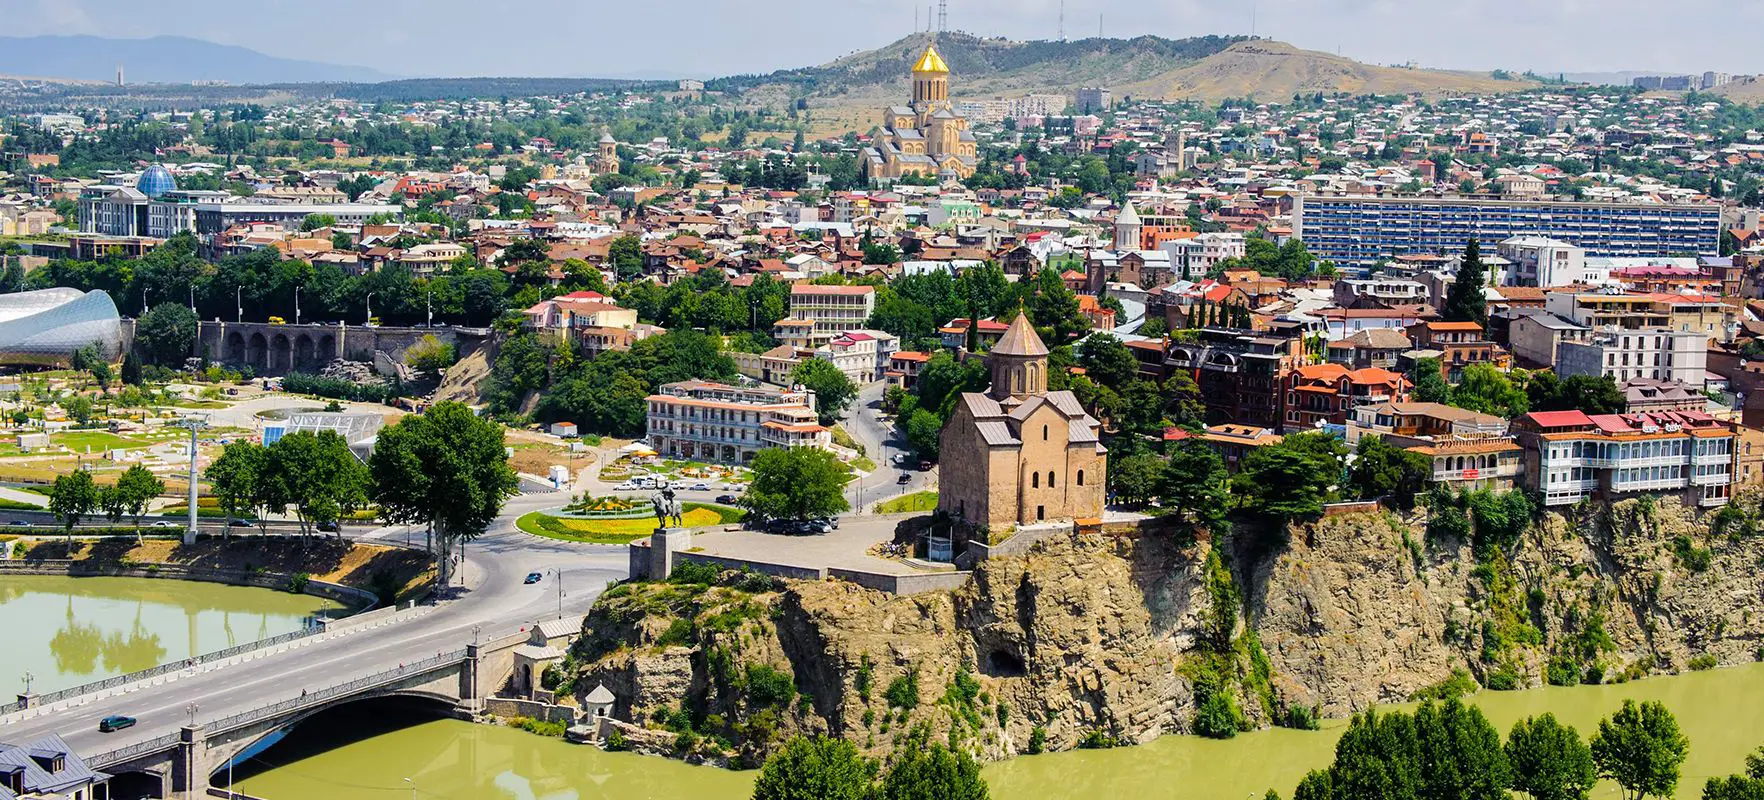 Tourist's guide to where to stay overnight in Tbilisi